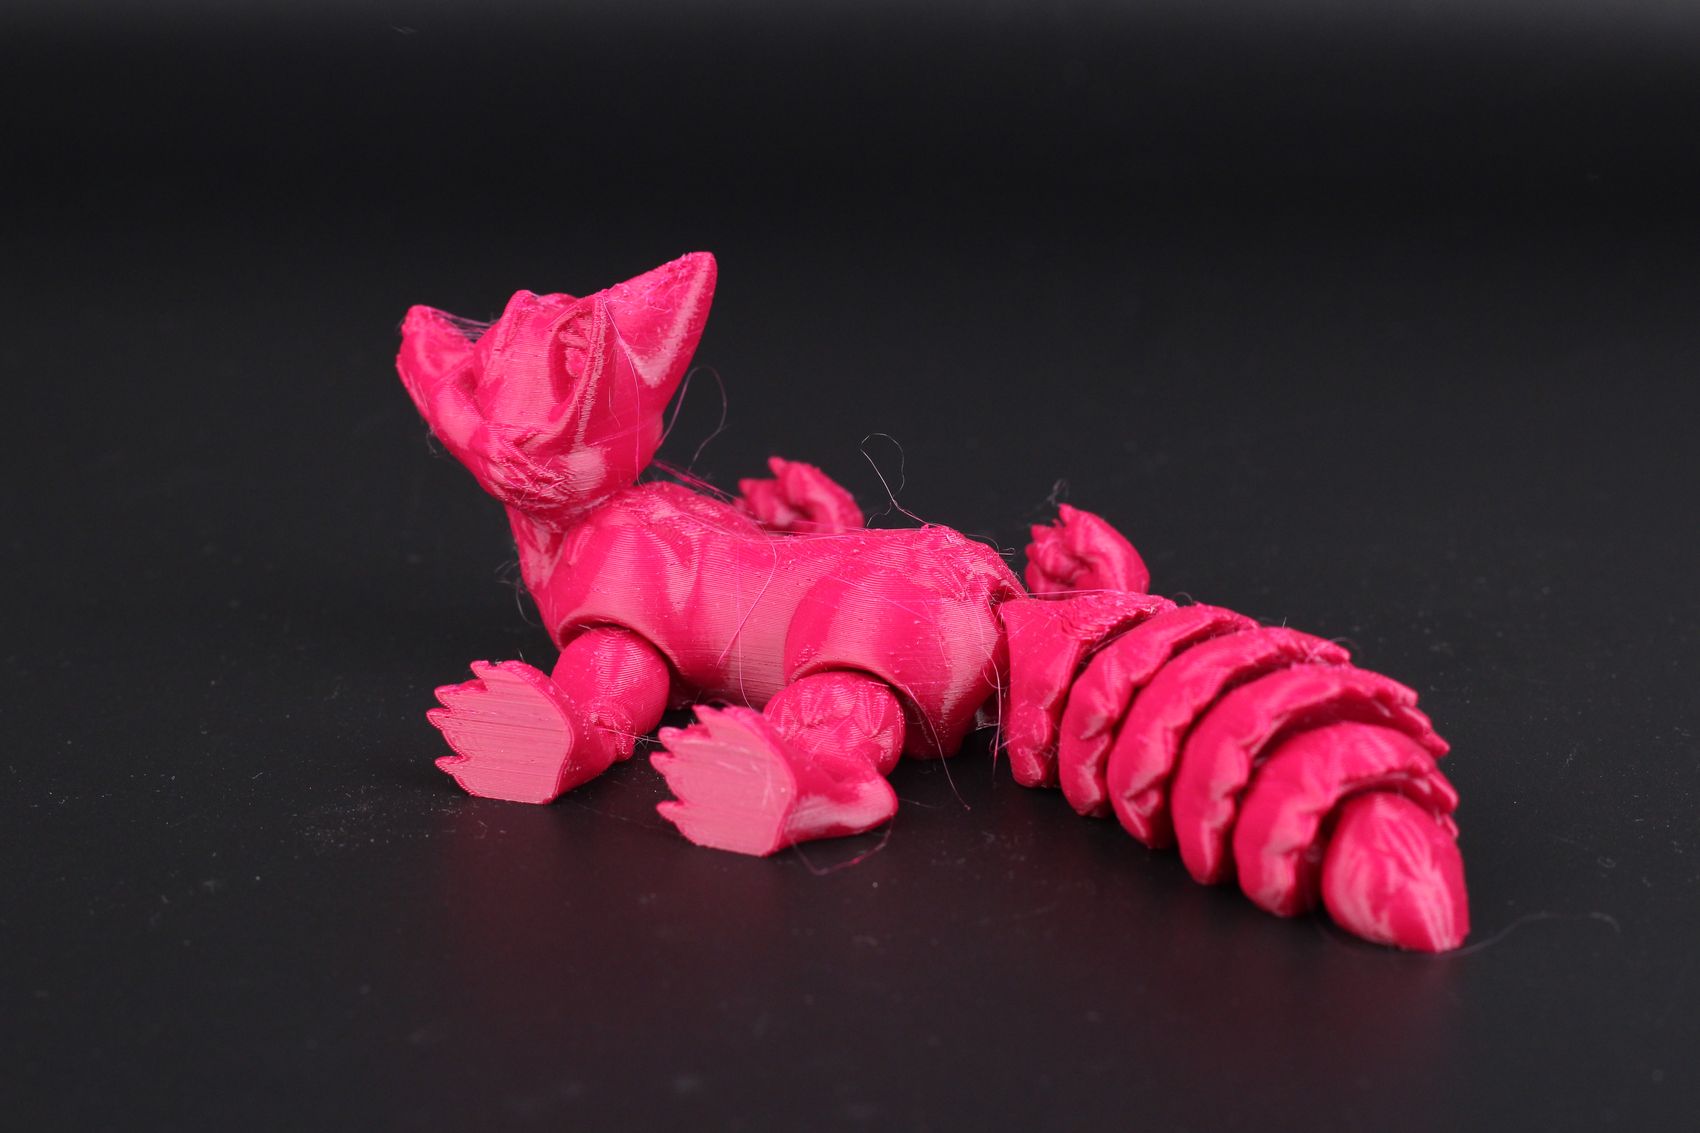 Flexi Fox printed on Anycubic Kobra Plus1 | Anycubic Kobra Plus Review: A Larger Vyper